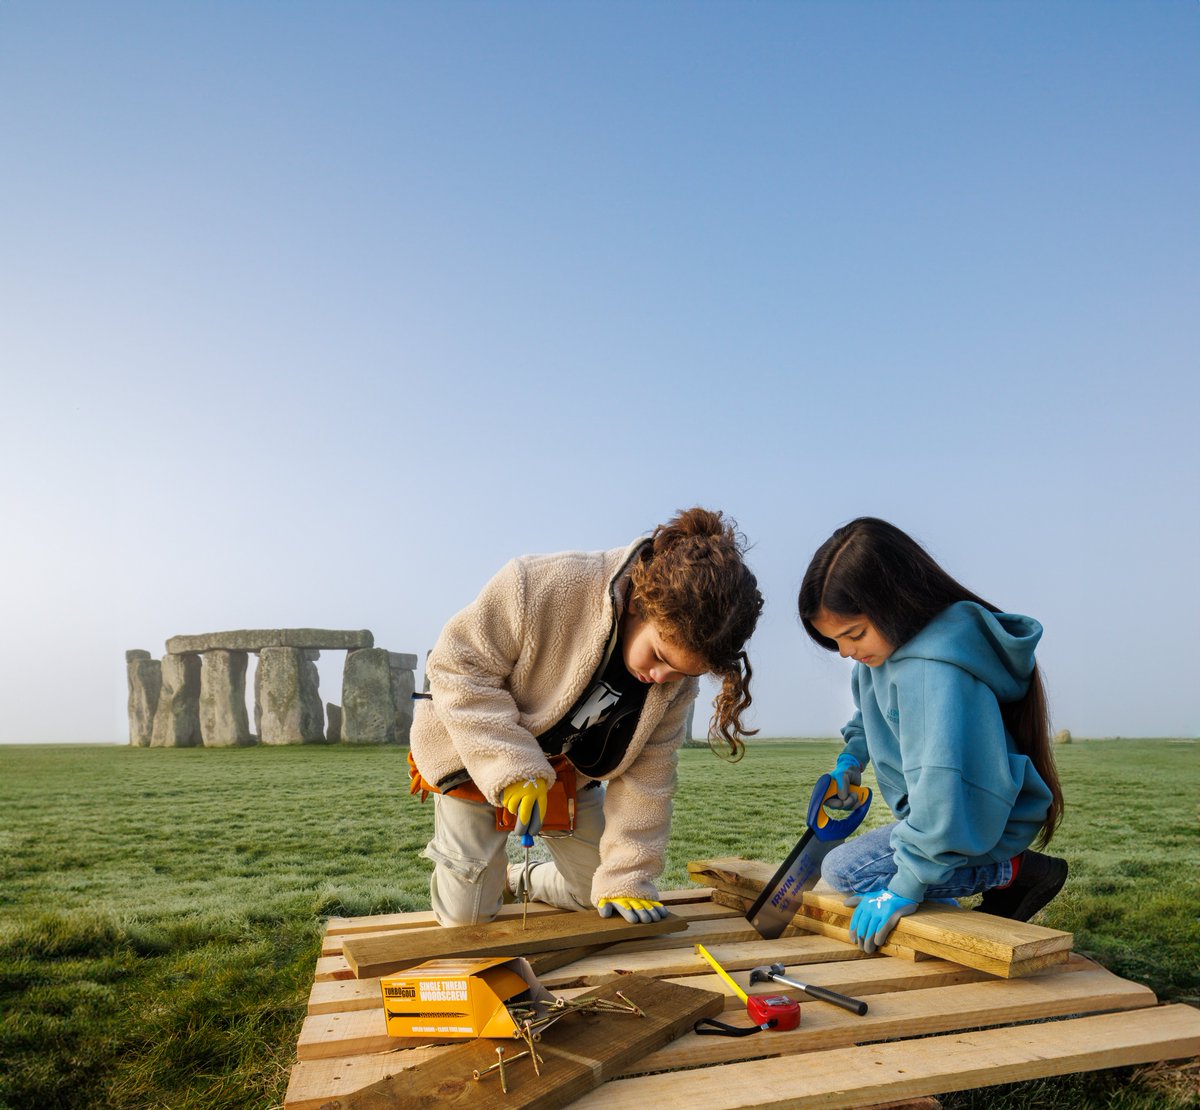 About 5,000 years ago, the builders of @EH_Stonehenge worked together to construct an incredible monument. This May, children and their adults are invited to design and build Playhenge – a one-of-a-kind adventure playground! 🤸 Find out more➡️greatwestway.co.uk/see-and-do/fes…